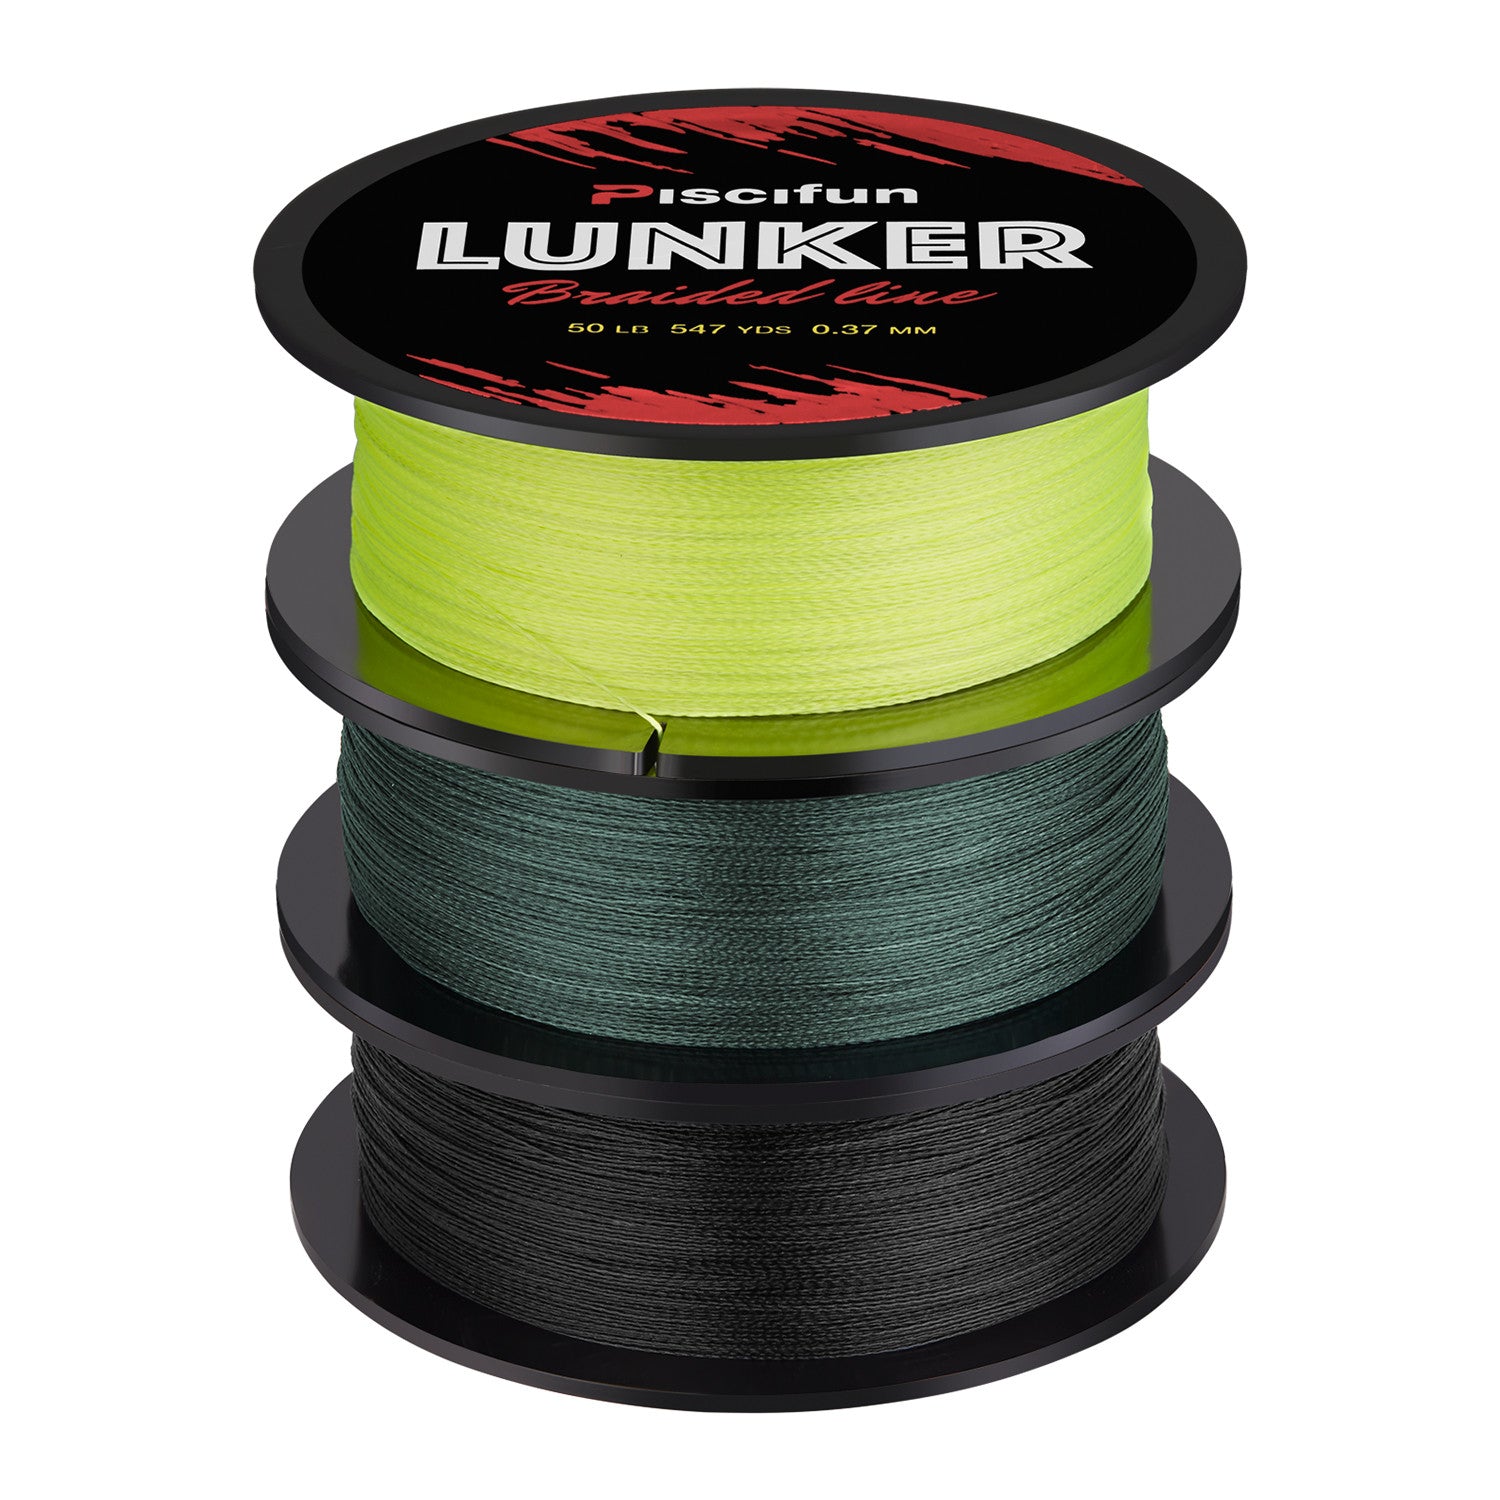 Piscifun® Lunker Braided Fishing Line 547Yds/ 500M 4 Strands 